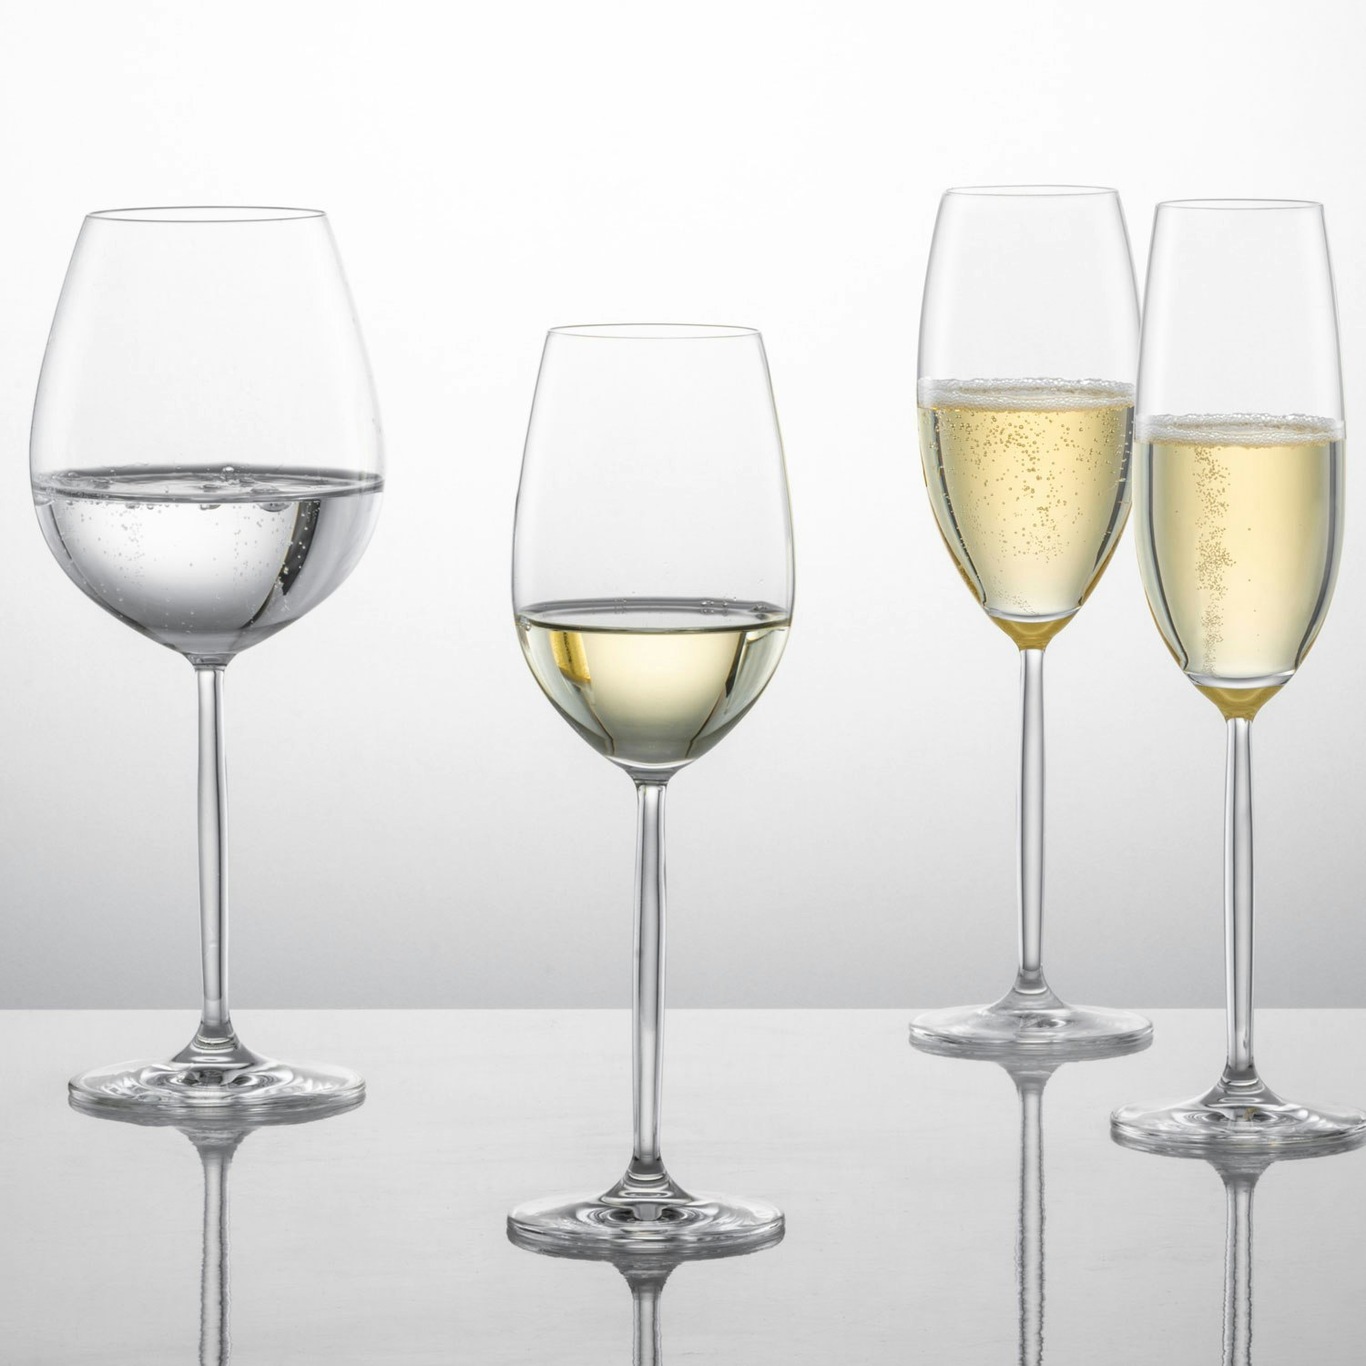 https://royaldesign.com/image/2/zwiesel-diva-champagne-glass-30-cl-2-pack-2?w=800&quality=80